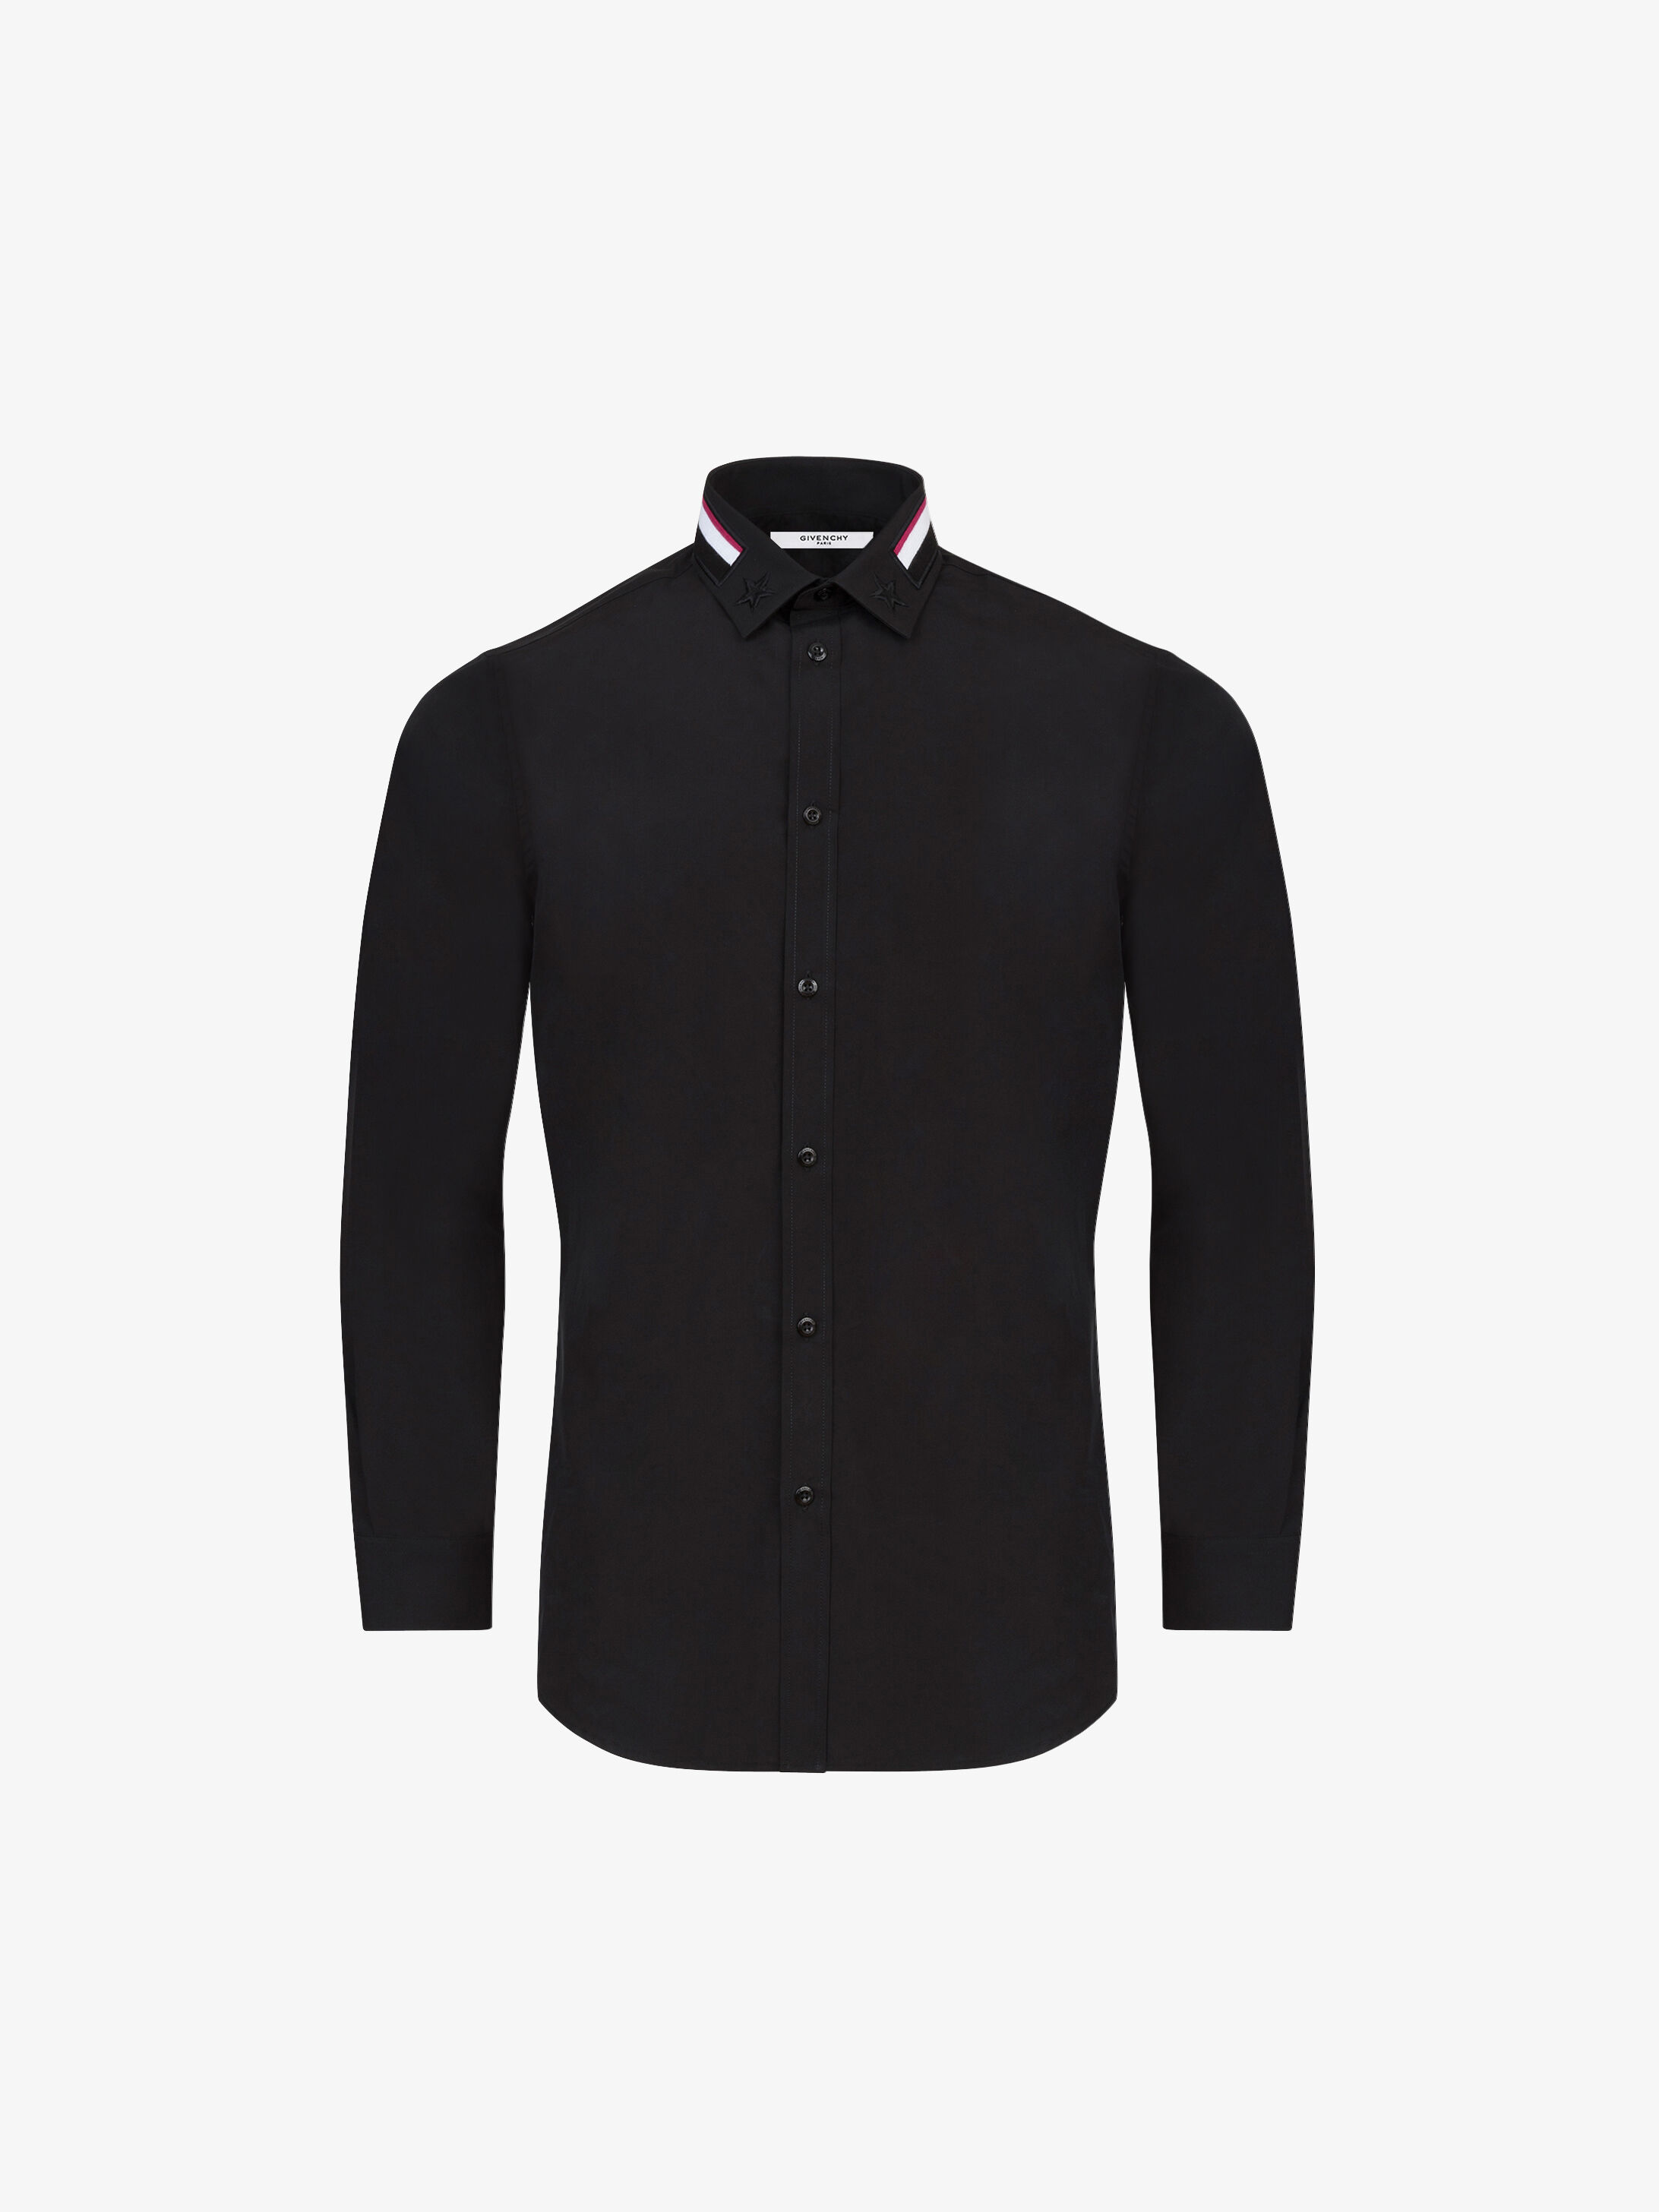 Slim fit shirt with bands and 